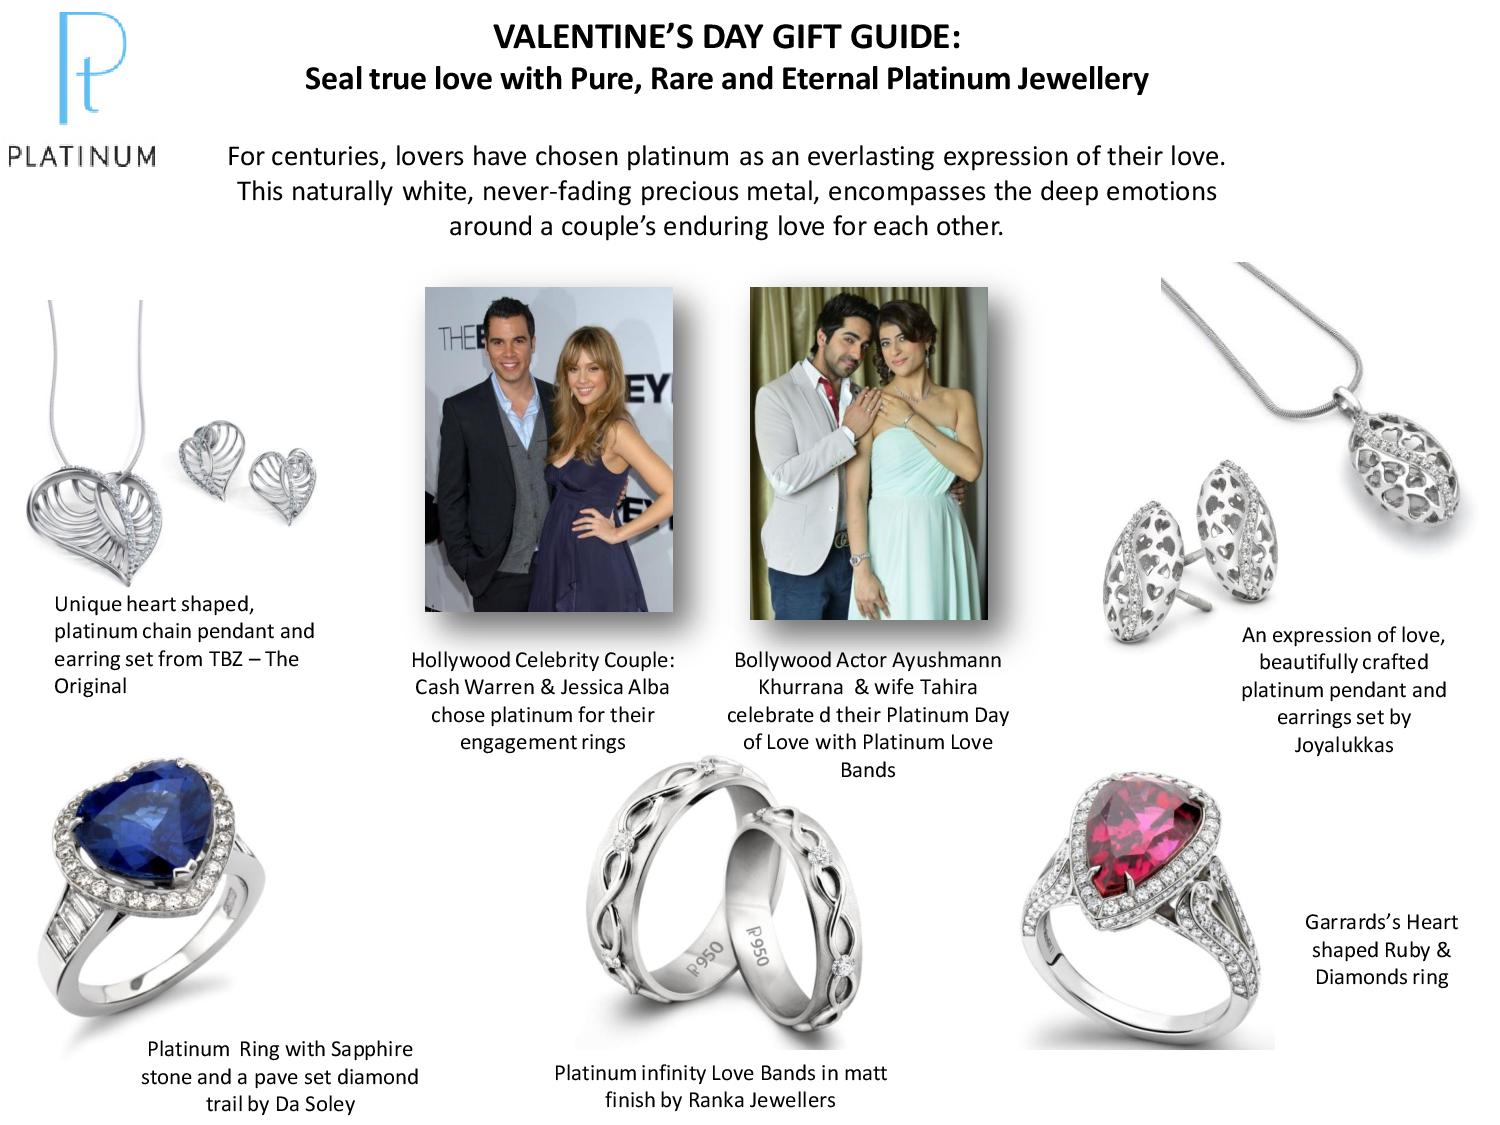 Valentines Day Gift Guide- Seal true love with Pure Rare and Eternal Platinum Jewellery